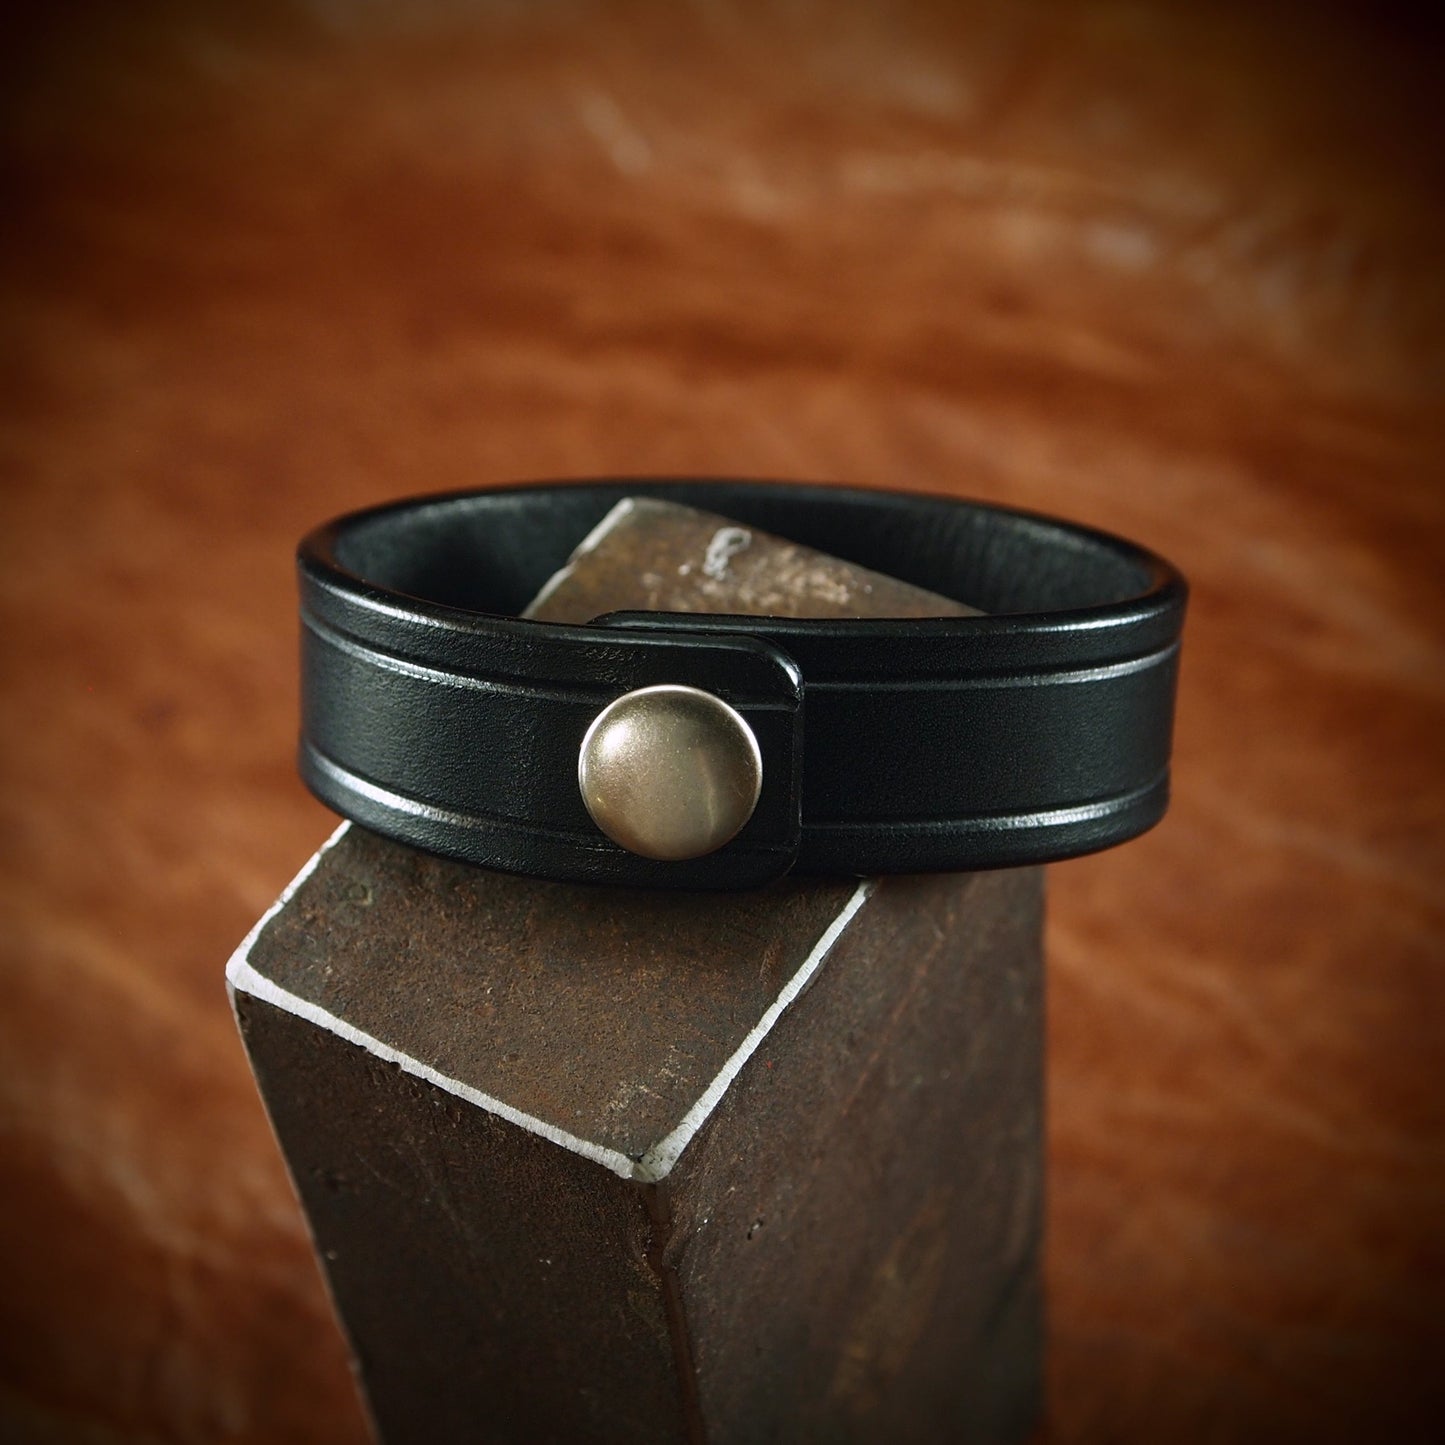 Black bridle leather bracelet : Snap cuff Italian veg-tan leather. Scribed, Sexy and luxurious Made in USA!